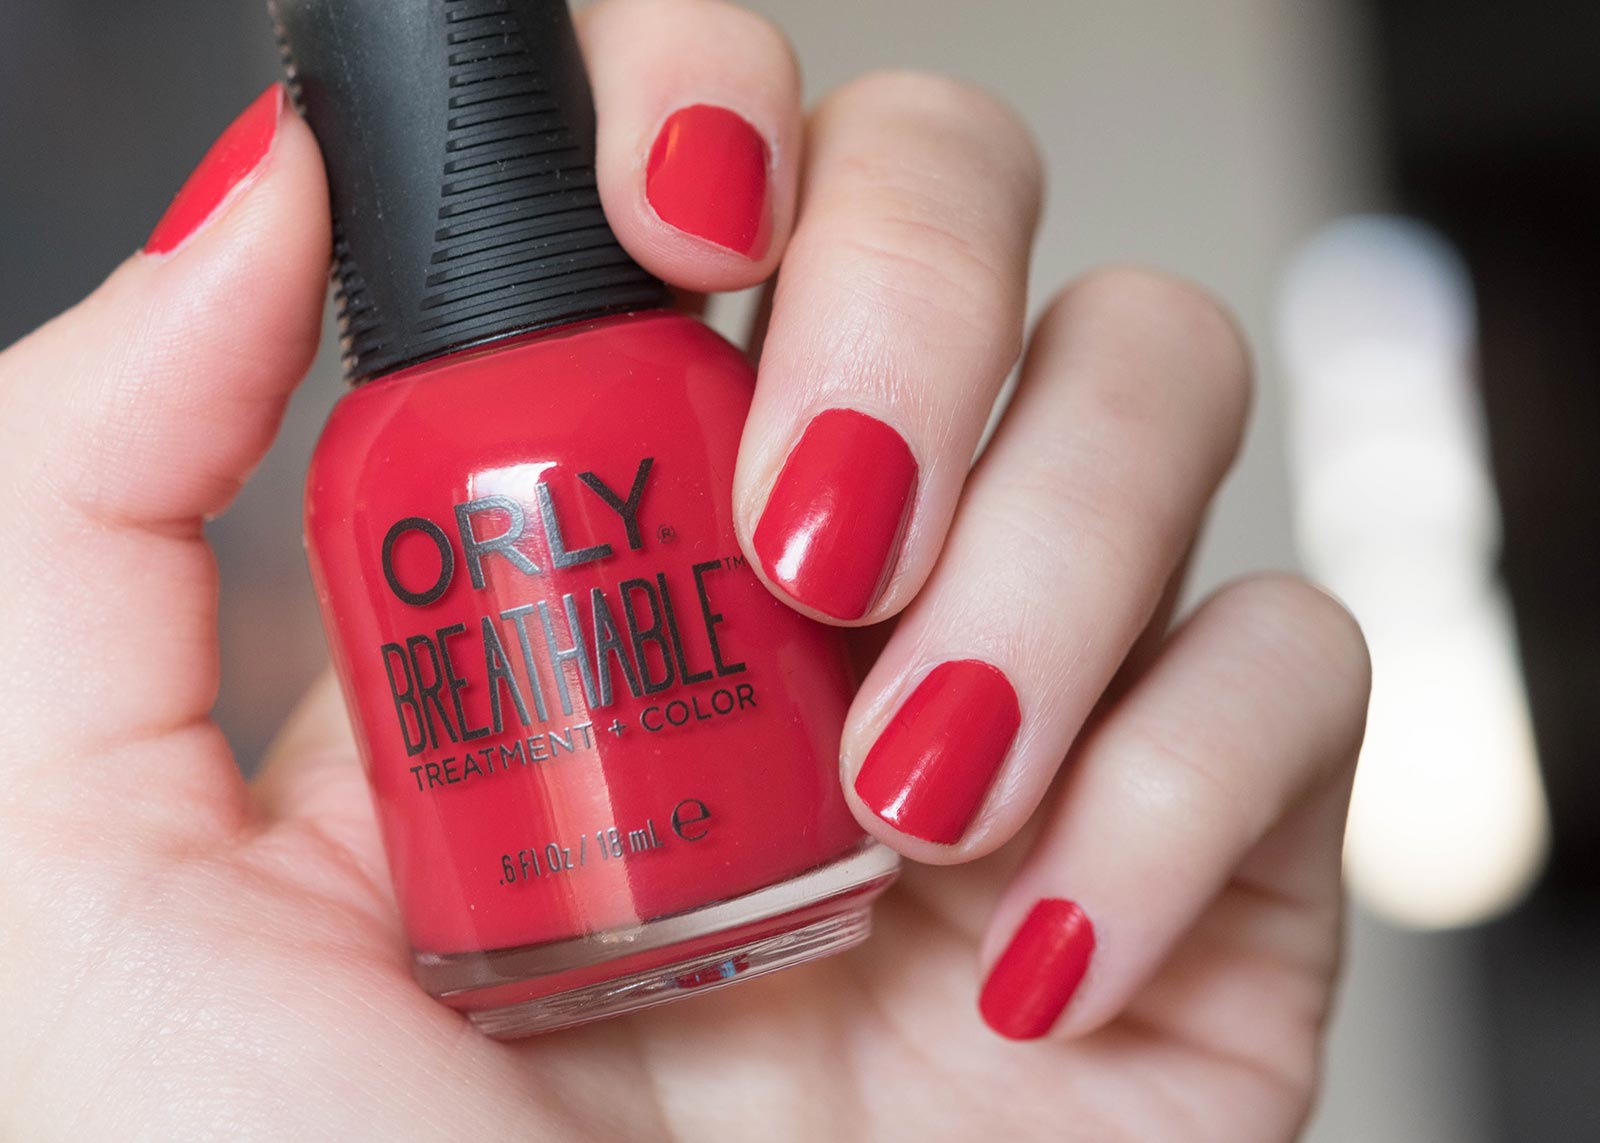 9. "First Crush" Nail Polish by Orly - wide 6